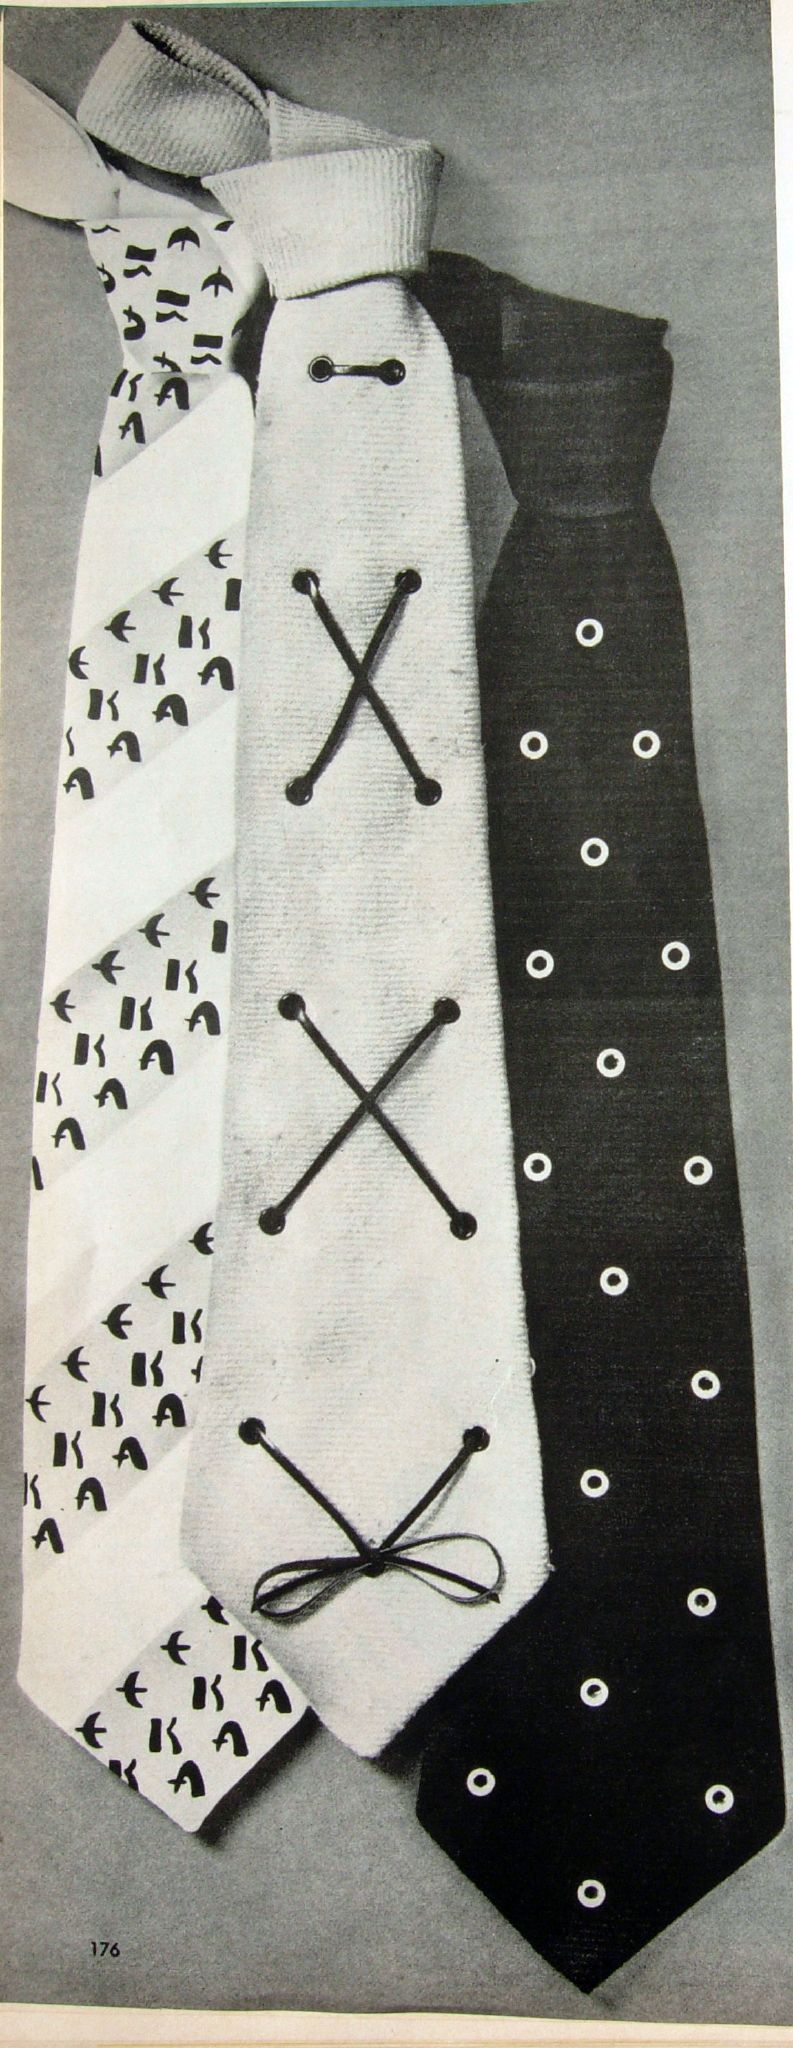 three neck ties with crosses, circles and dots